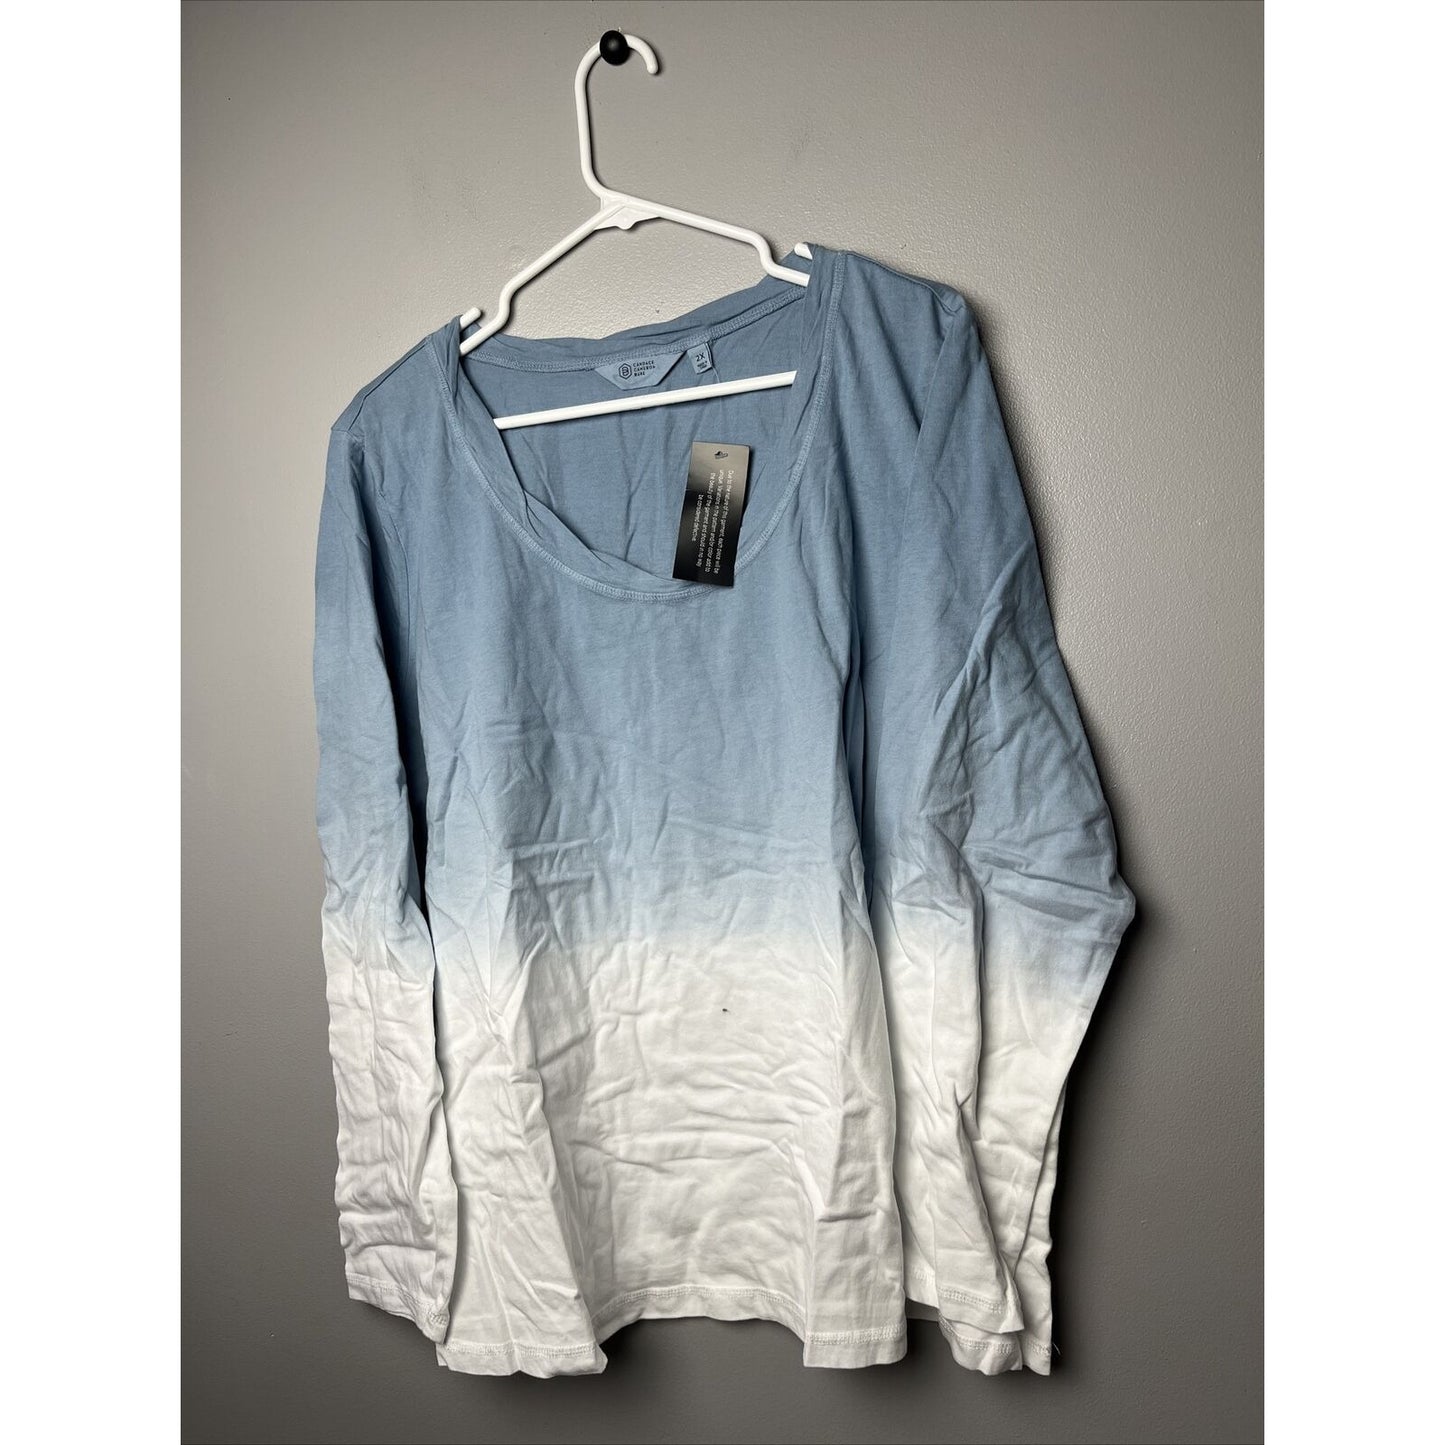 Candace Cameron Bure The Ocean Dipped Long-Sleeve Tee Top Blue 2X Size